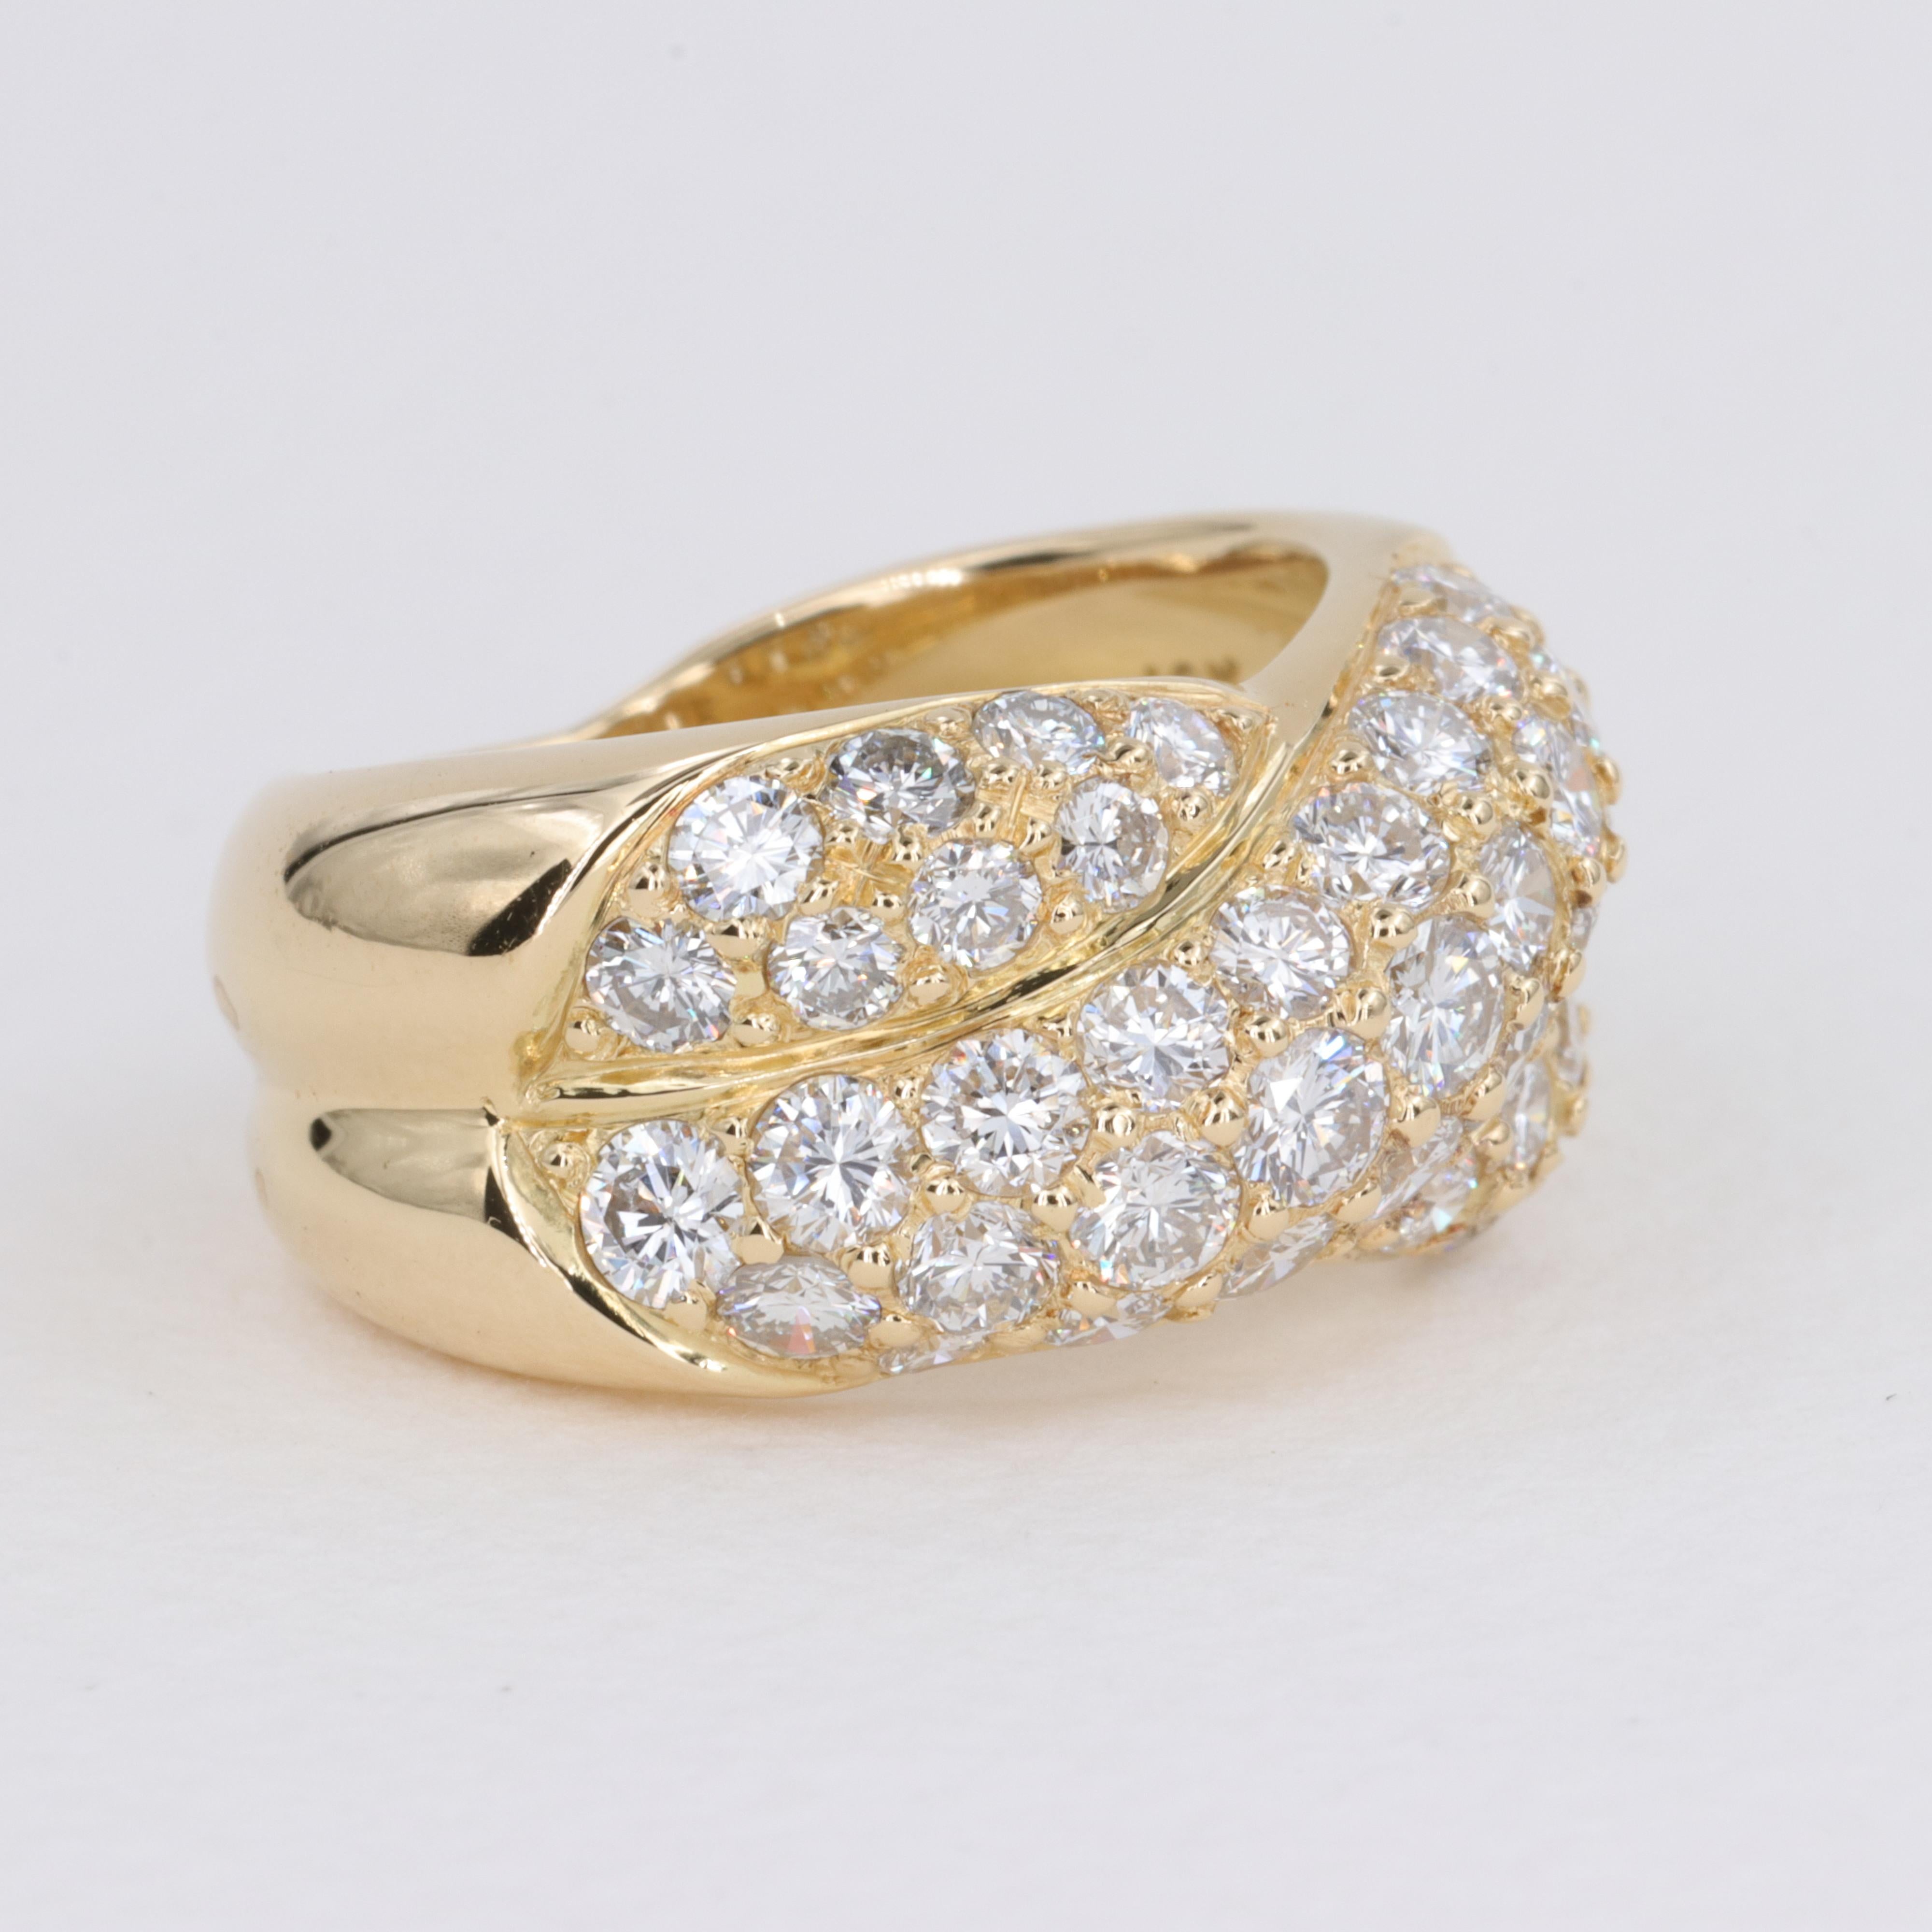 3.35 Carat Diamond and 18 Karat Yellow Gold Cross Over Domed Band  In Excellent Condition For Sale In Tampa, FL